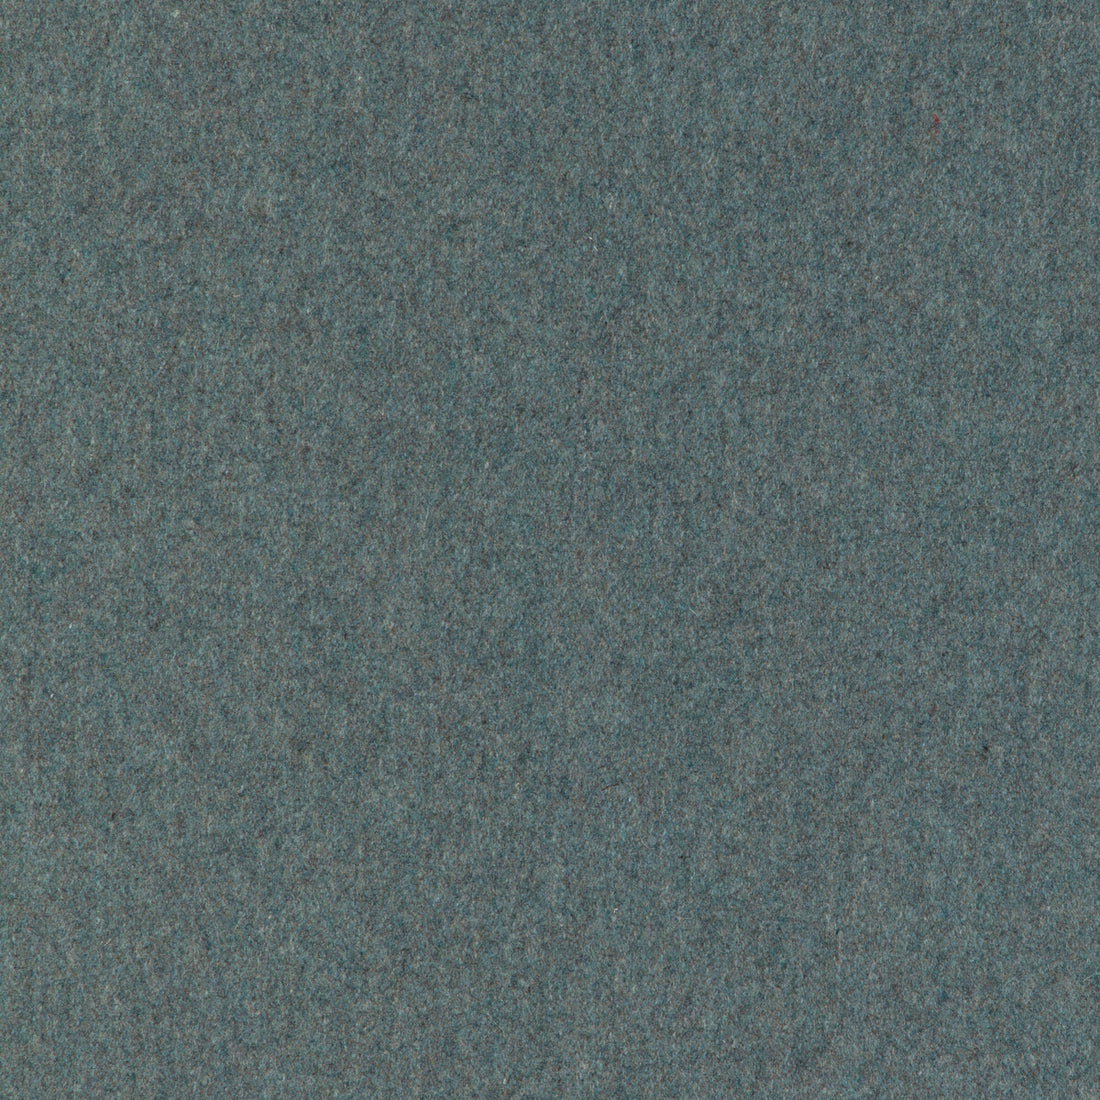 Jefferson Wool fabric in stonewash color - pattern 34397.511.0 - by Kravet Contract